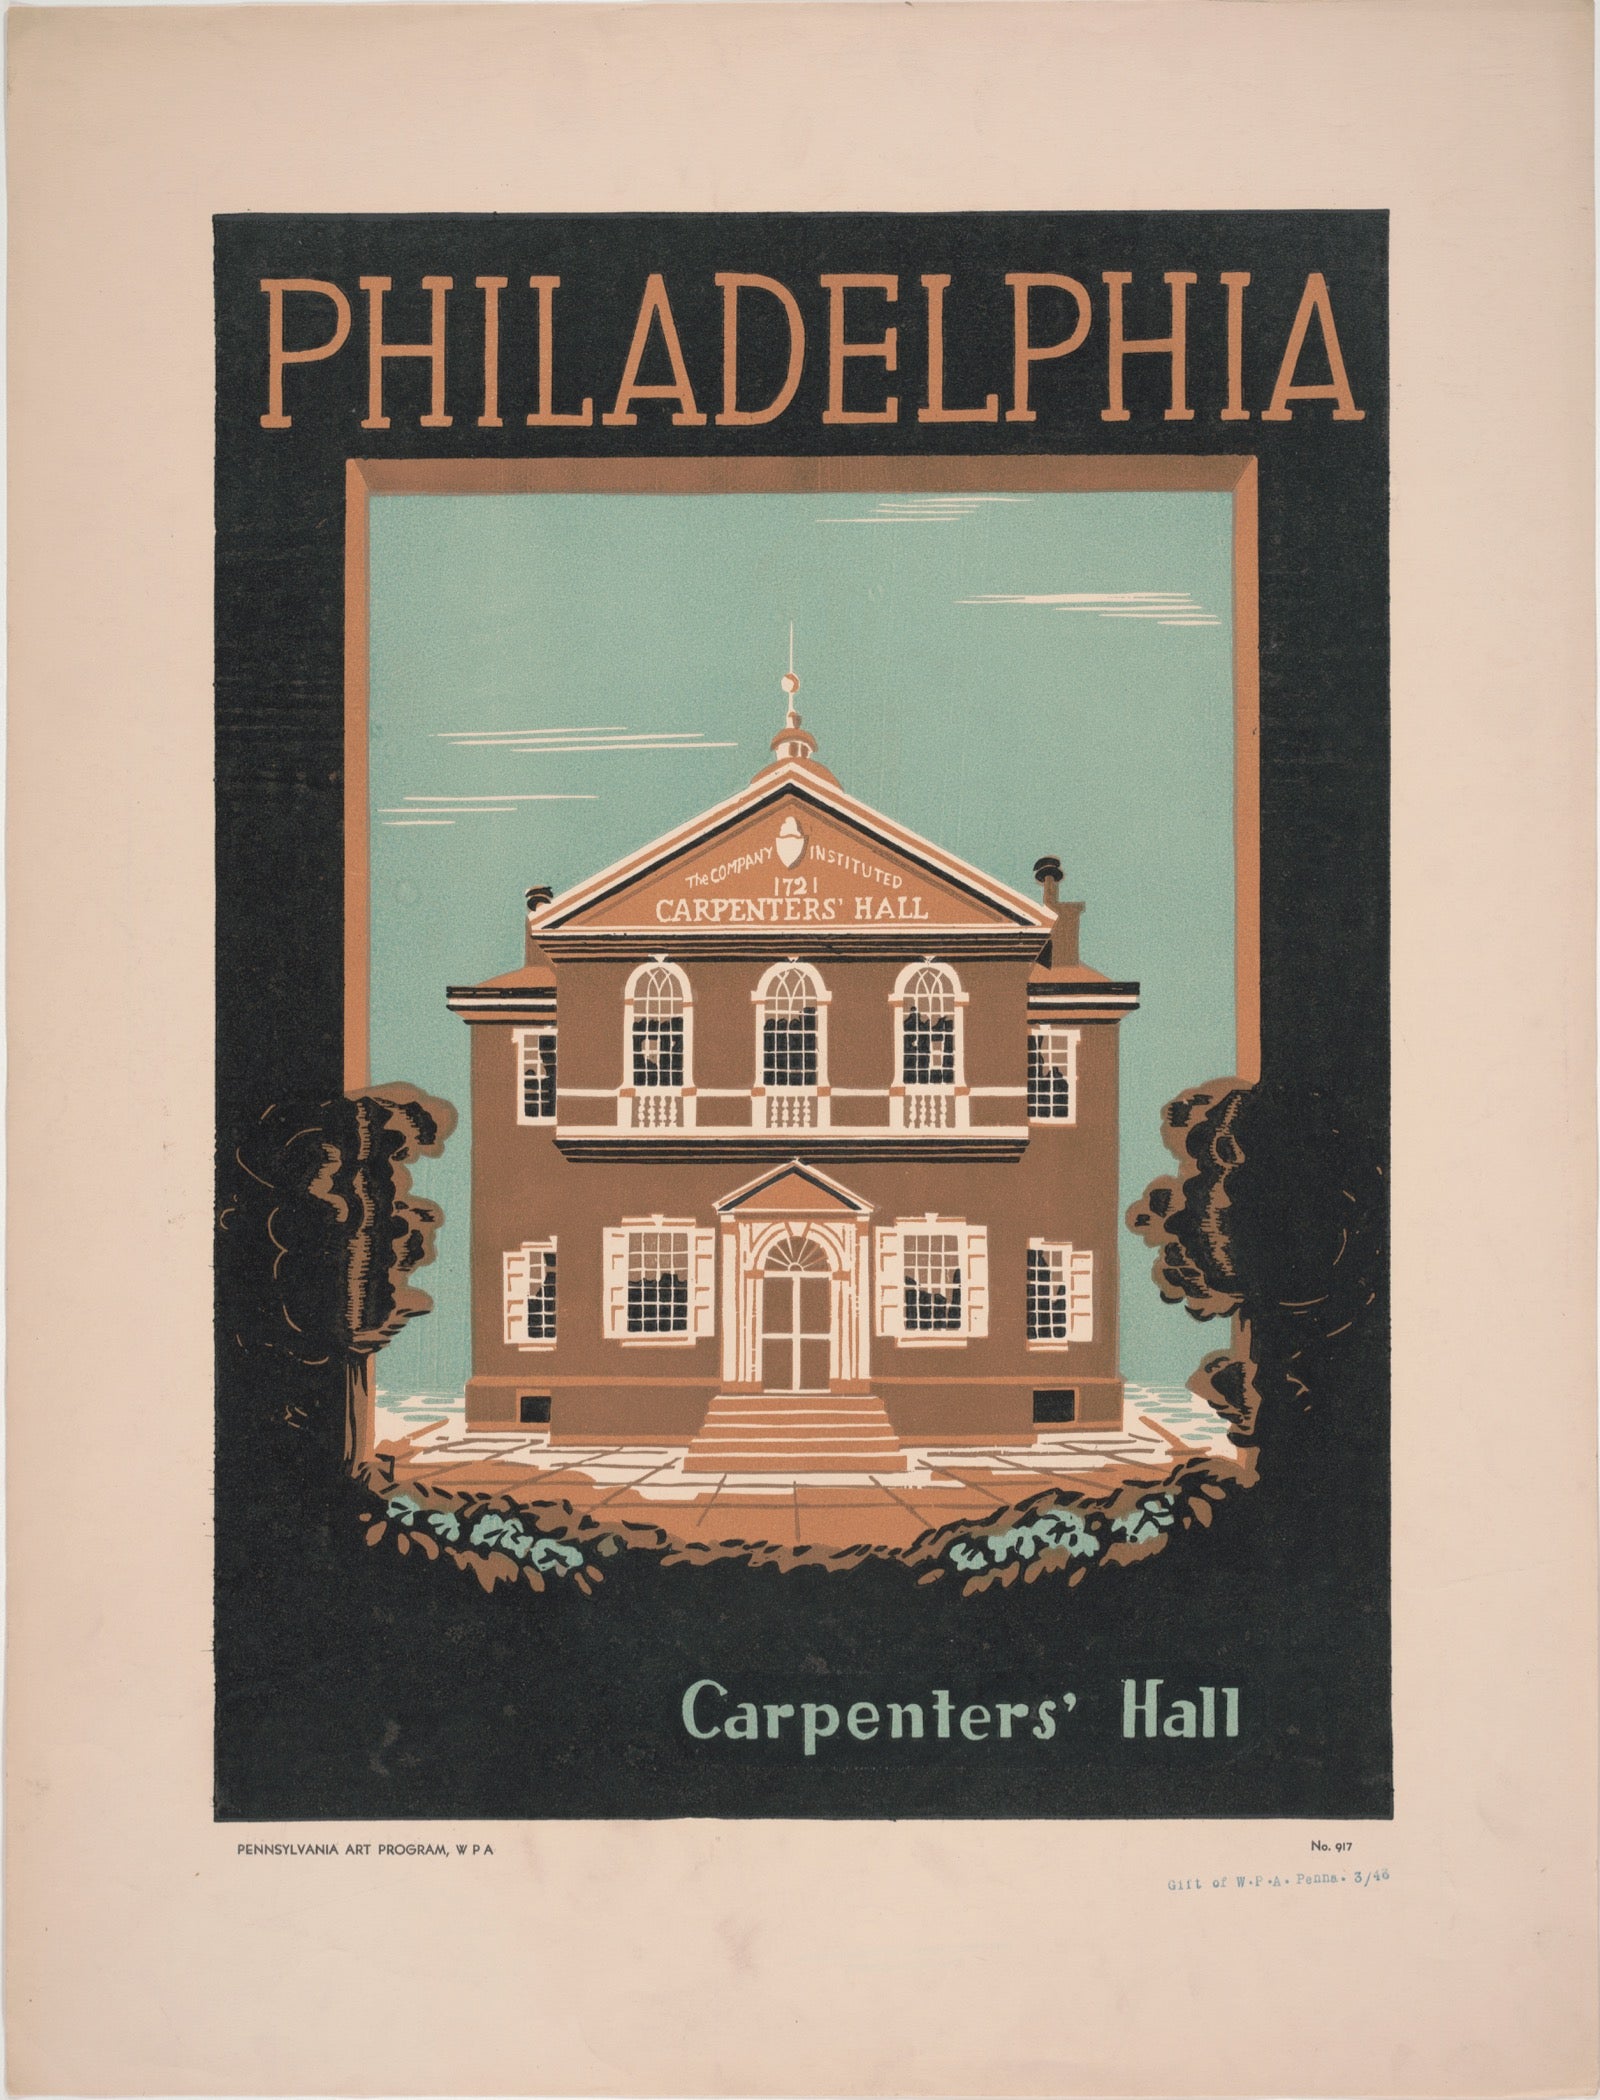 A Works Progress Administration poster depicts Carpenters' Hall in Philadelphia